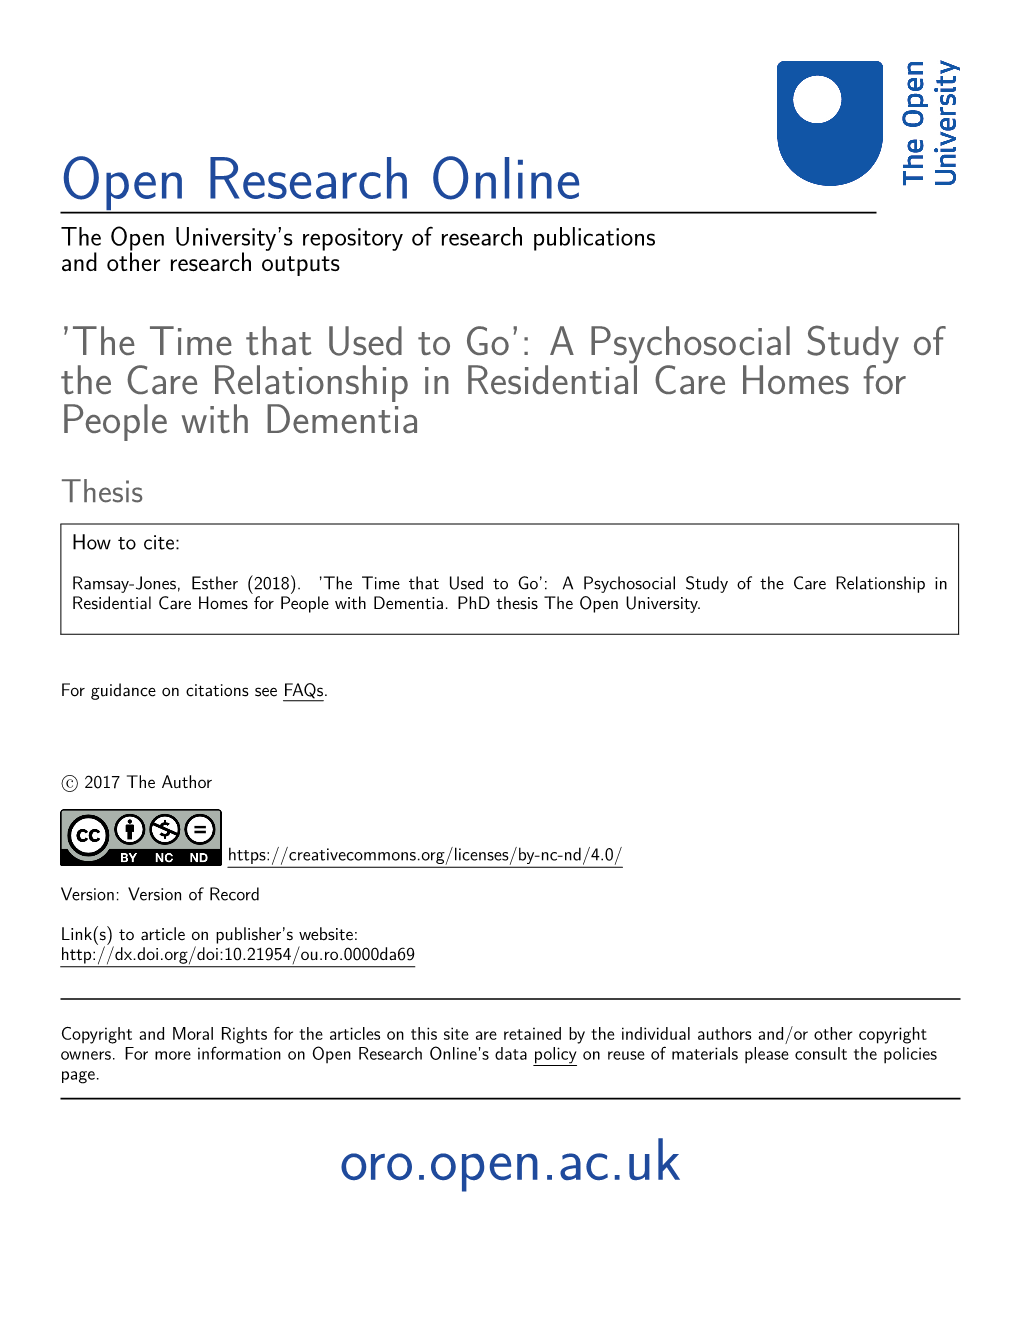 The Time That Used to Go’: a Psychosocial Study of the Care Relationship in Residential Care Homes for People with Dementia